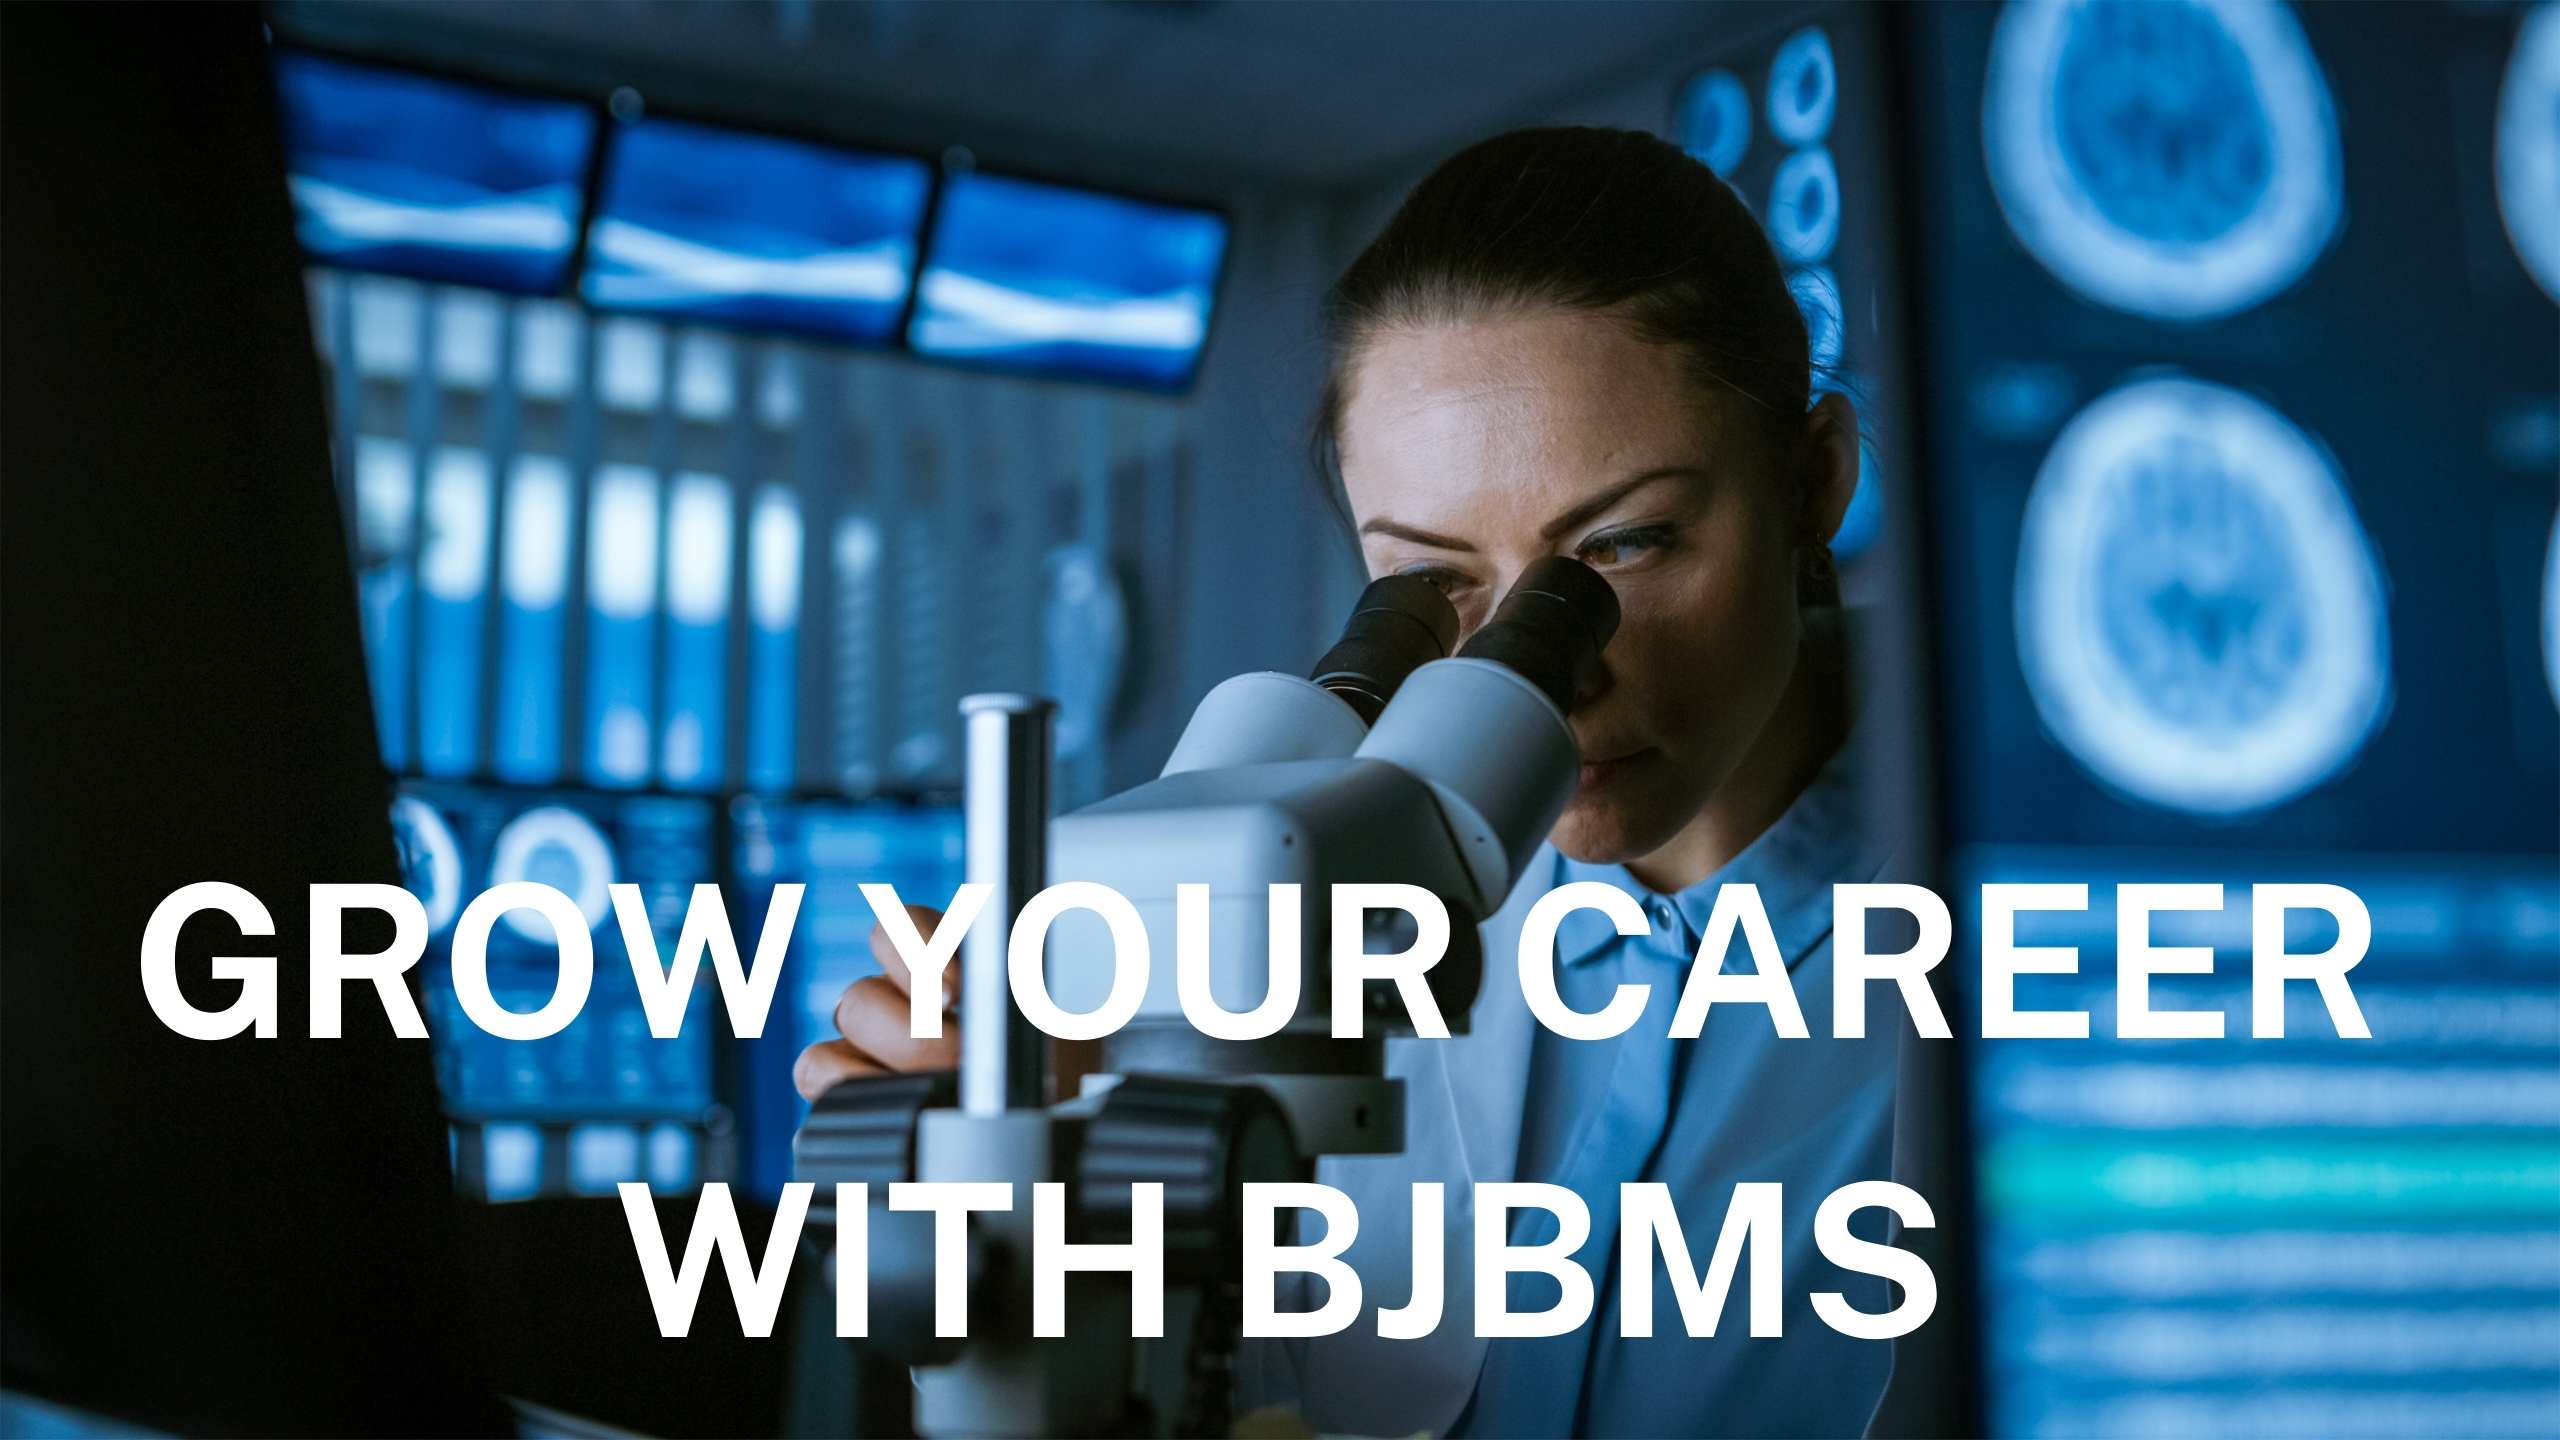 Grow your career with BJBMS